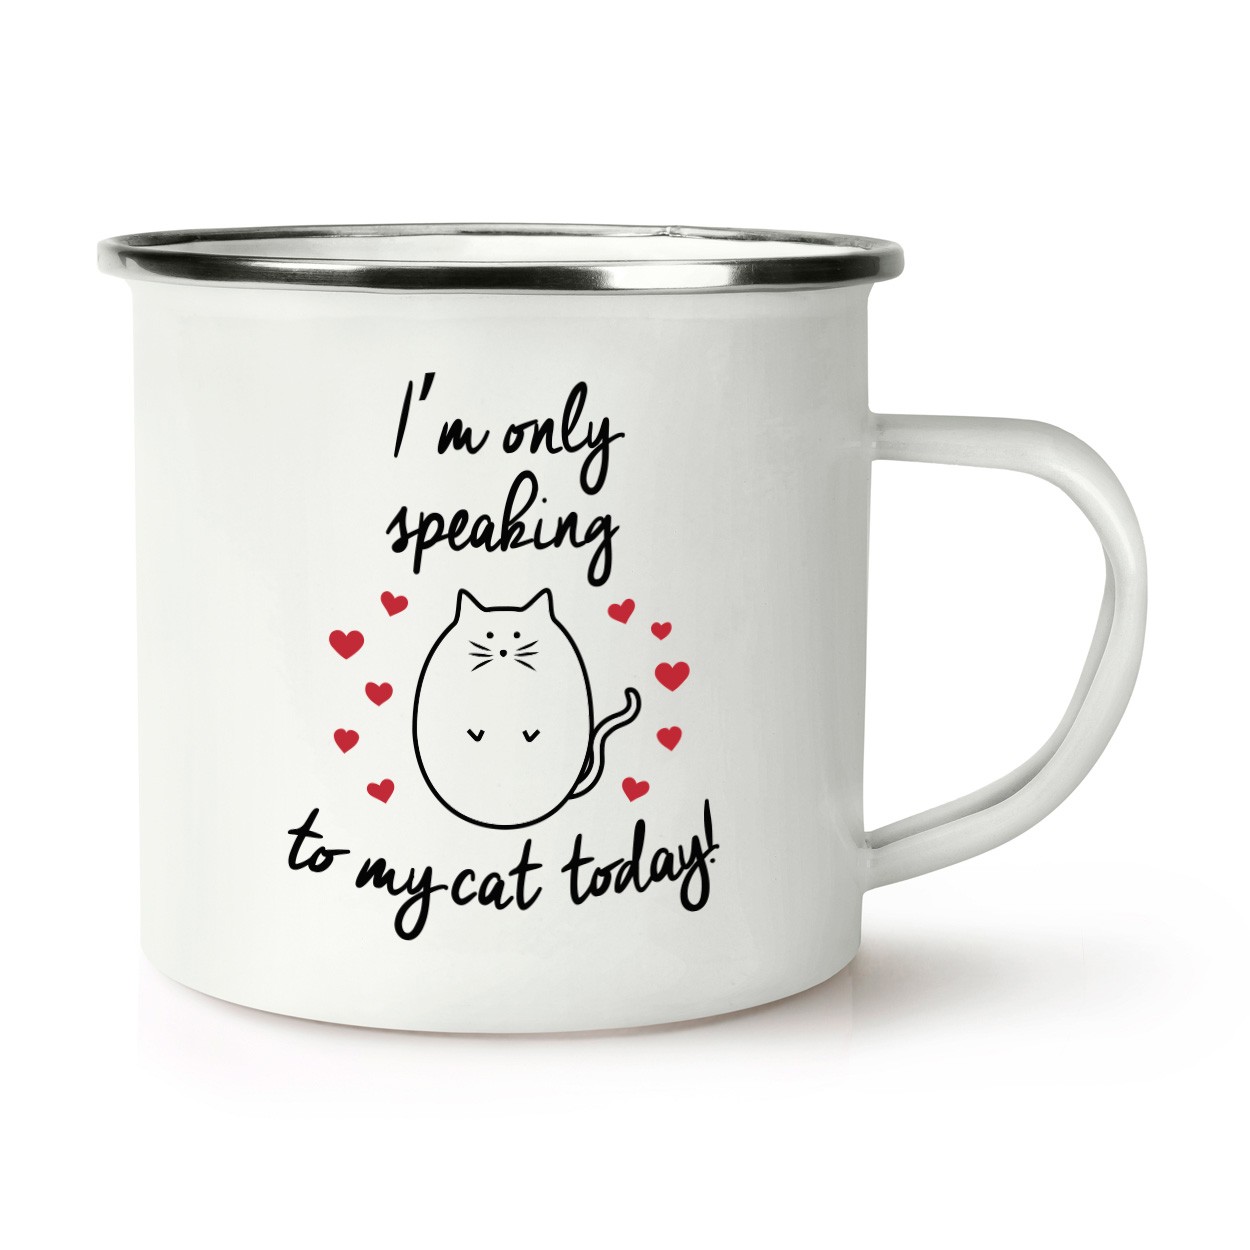 I'm Only Speaking To My Cat Today Retro Enamel Mug Cup